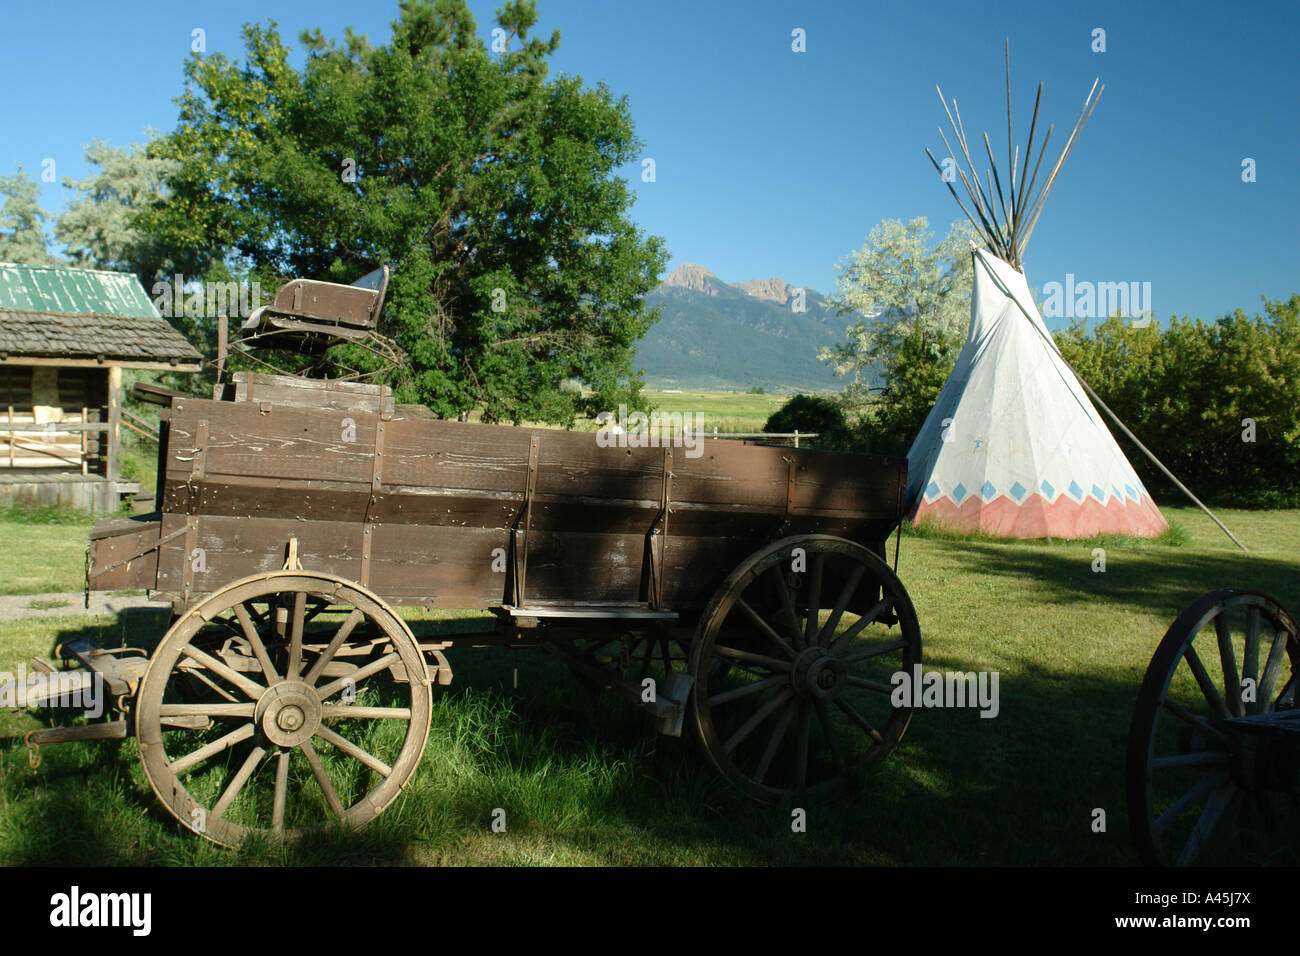 AJD56501, Ronan, MT, Montana, Flathead Indian Reservation, Mission Valley, Ninepipes Museum of Early Montana, tepee Stock Photo